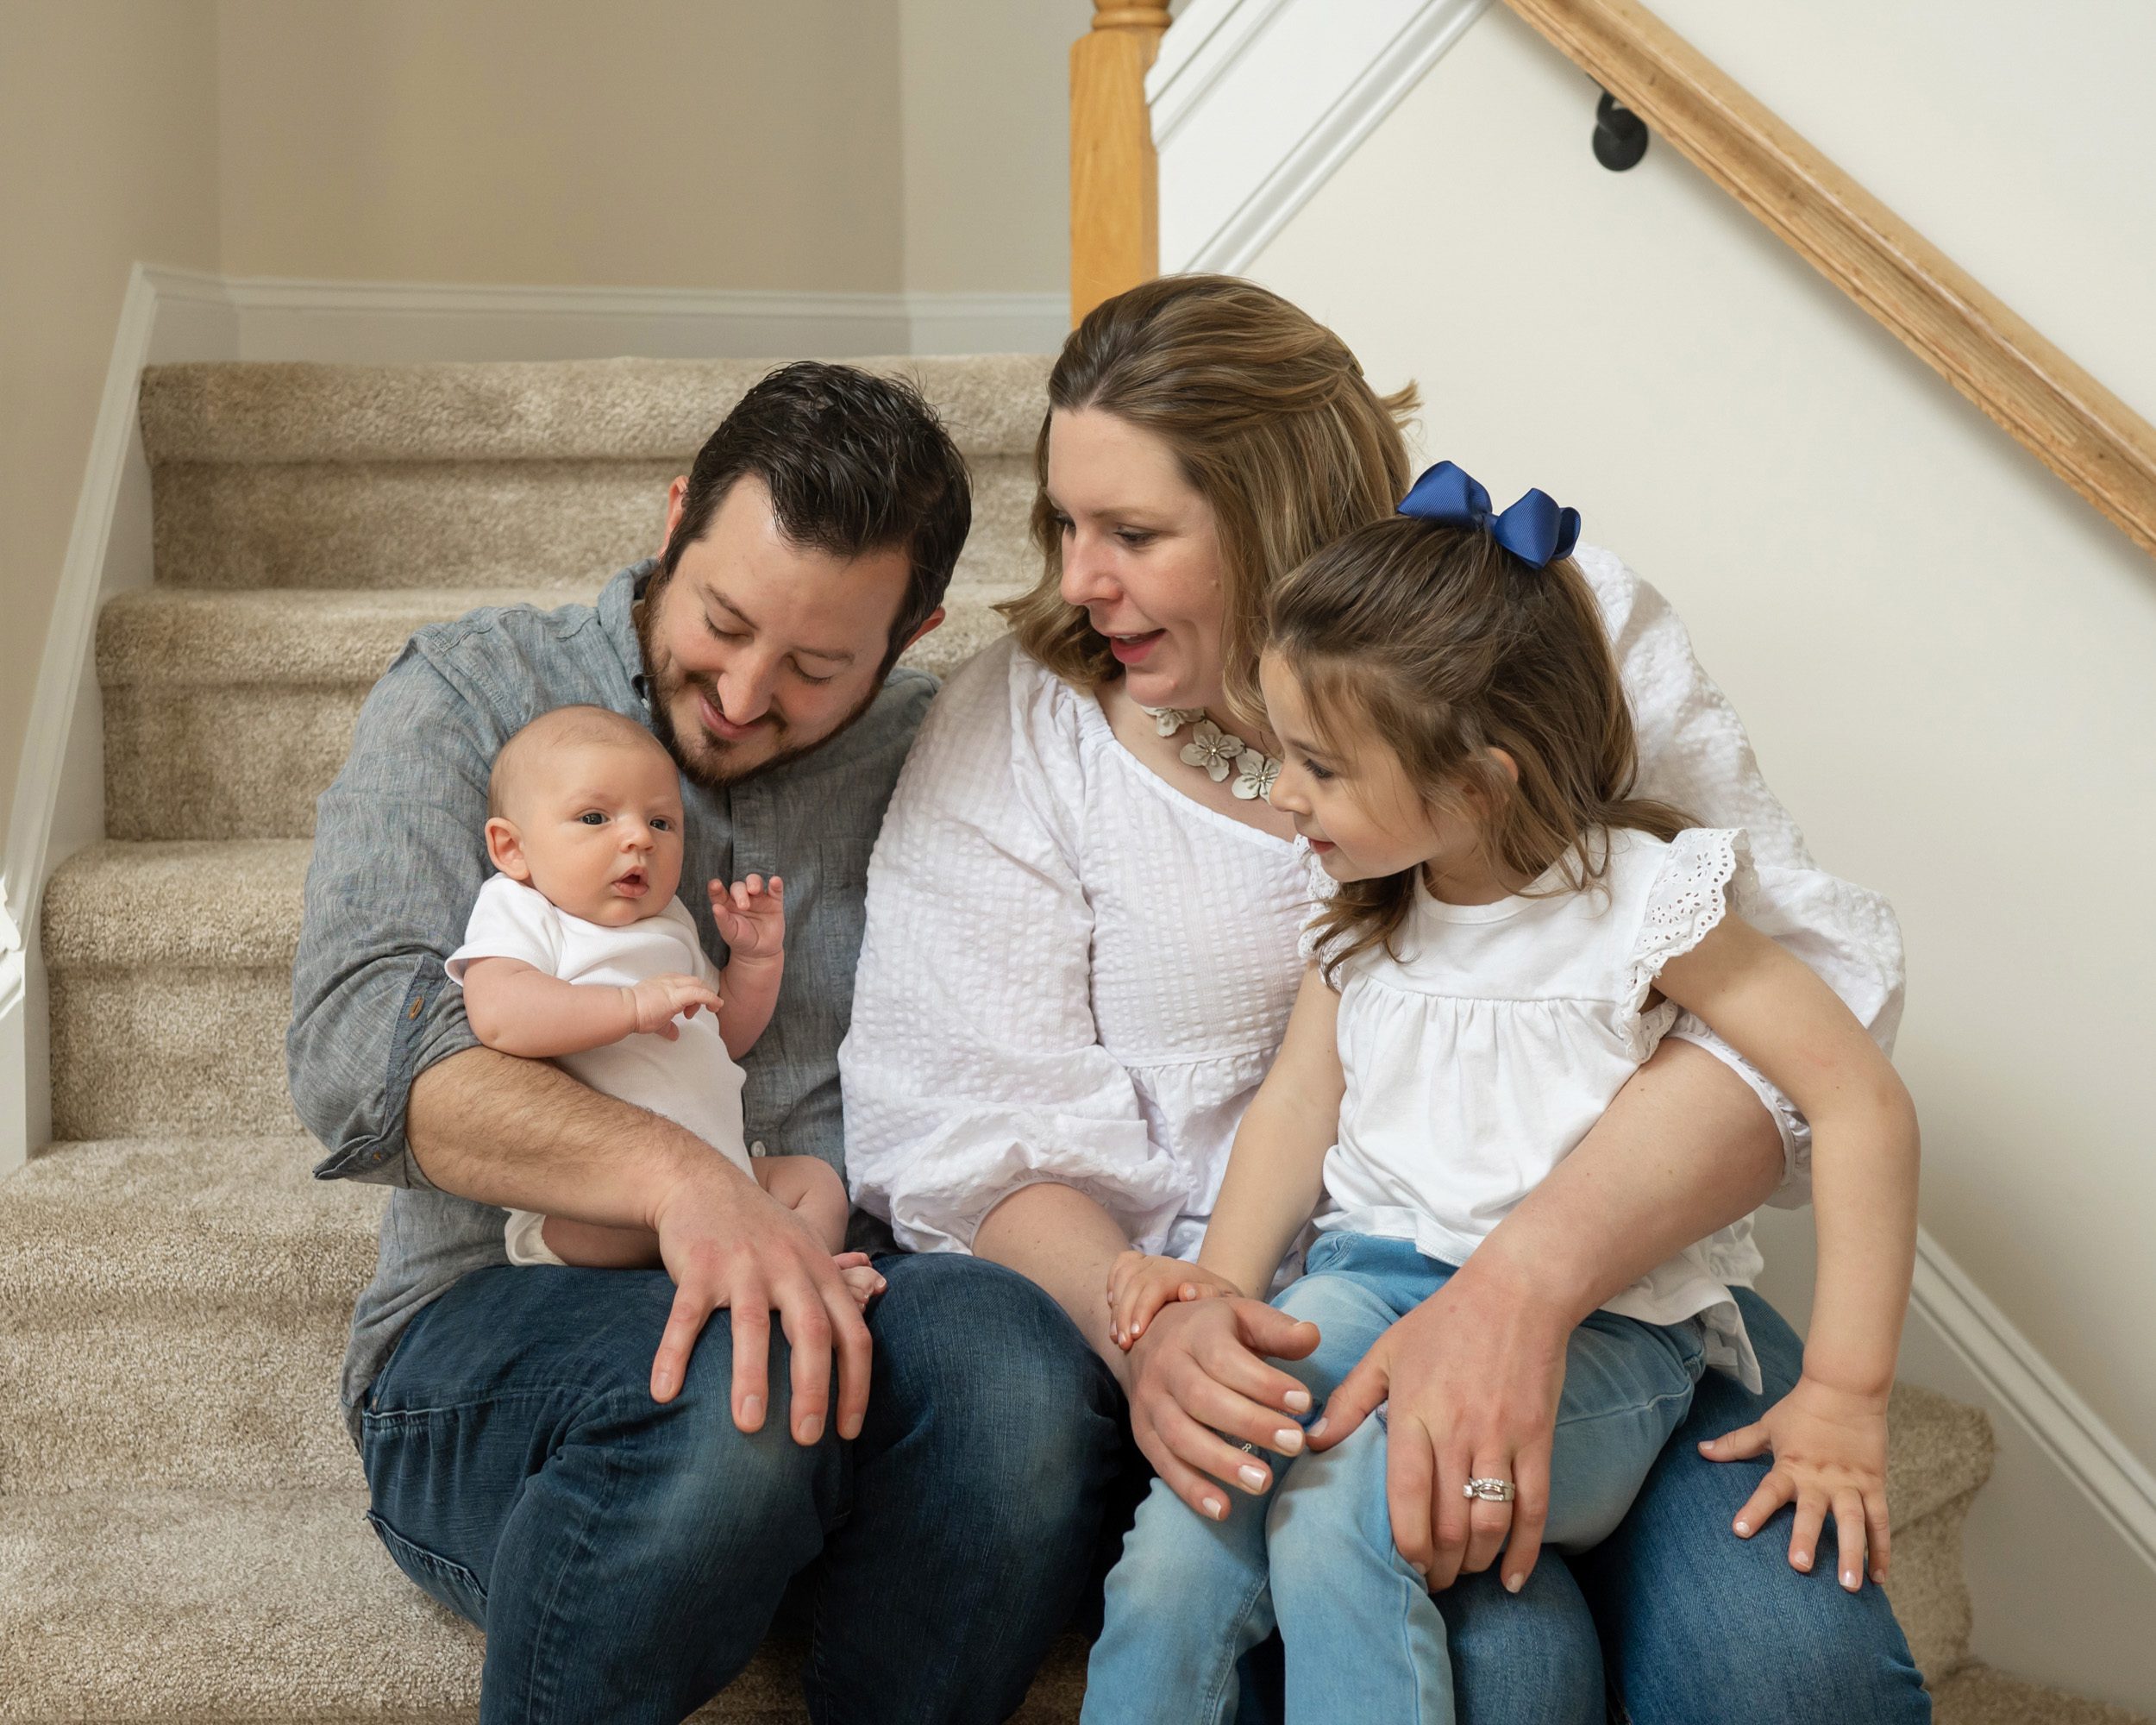 A new family of four sitting on their steps and smiling at their newborn baby boy during a gilbertsville home newborn photo session